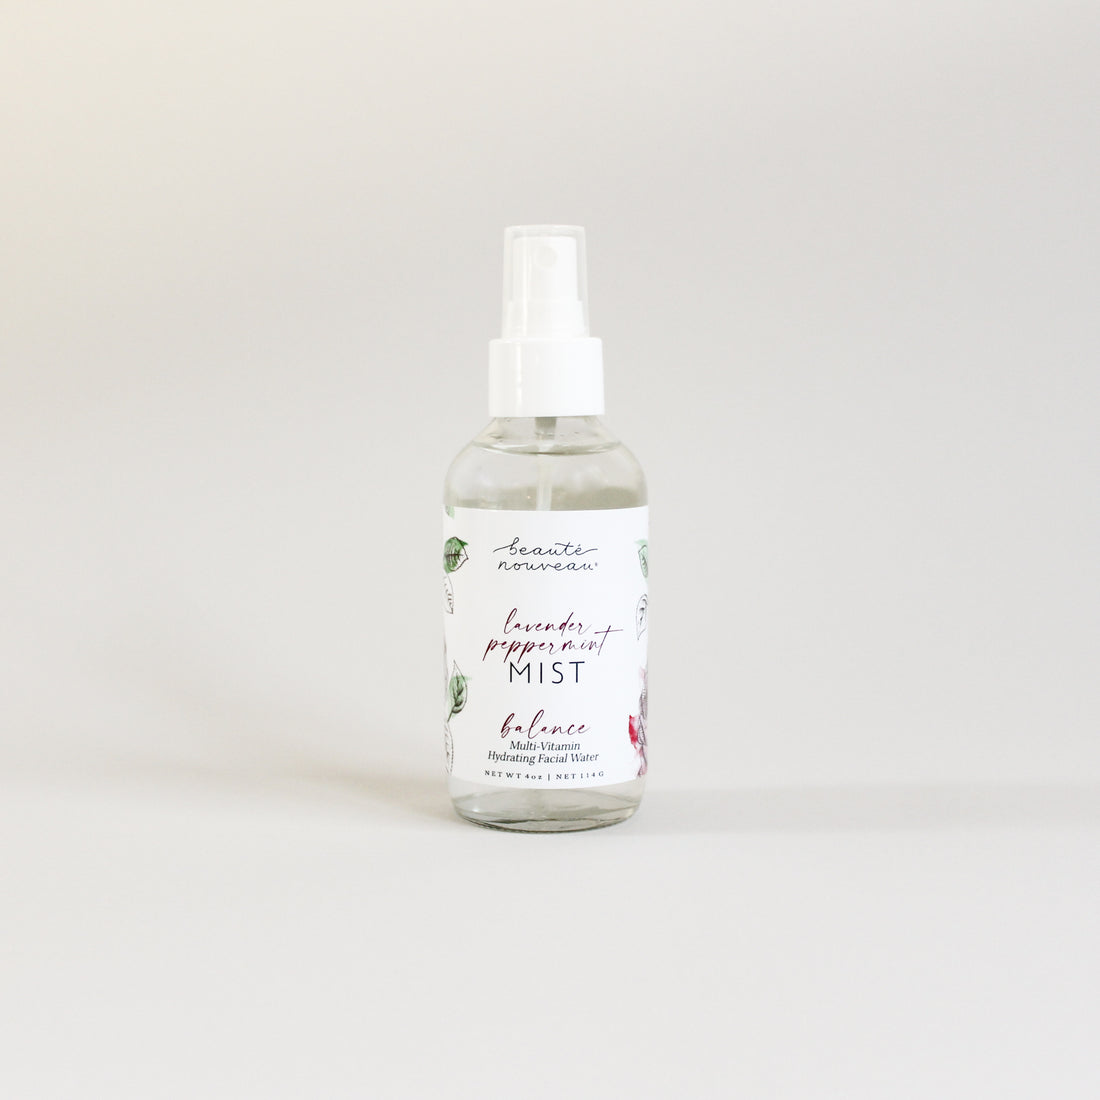 All-natural lavender peppermint facial mist.